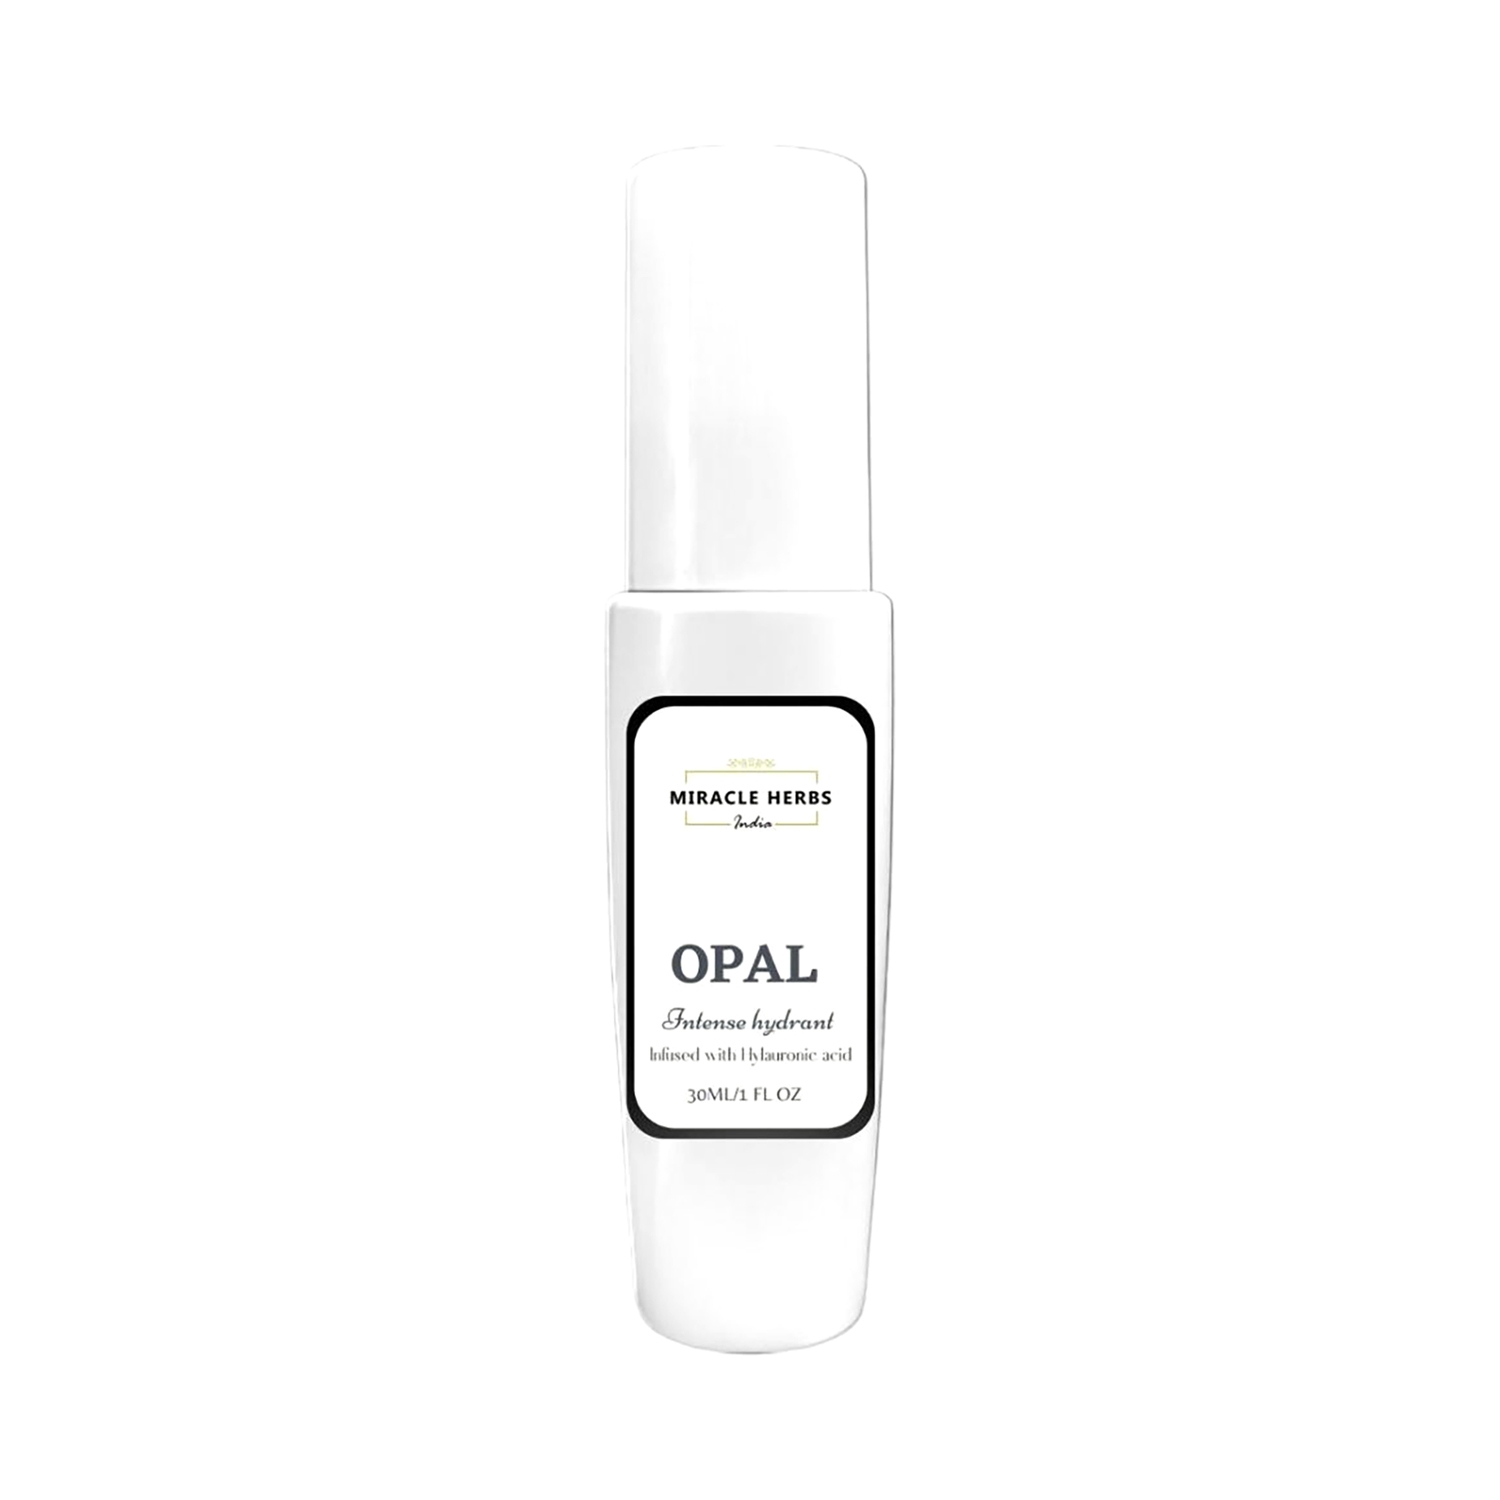 Miracle Herbs | Miracle Herbs Opal Intense hydrant infused Moisturizers (30ml)